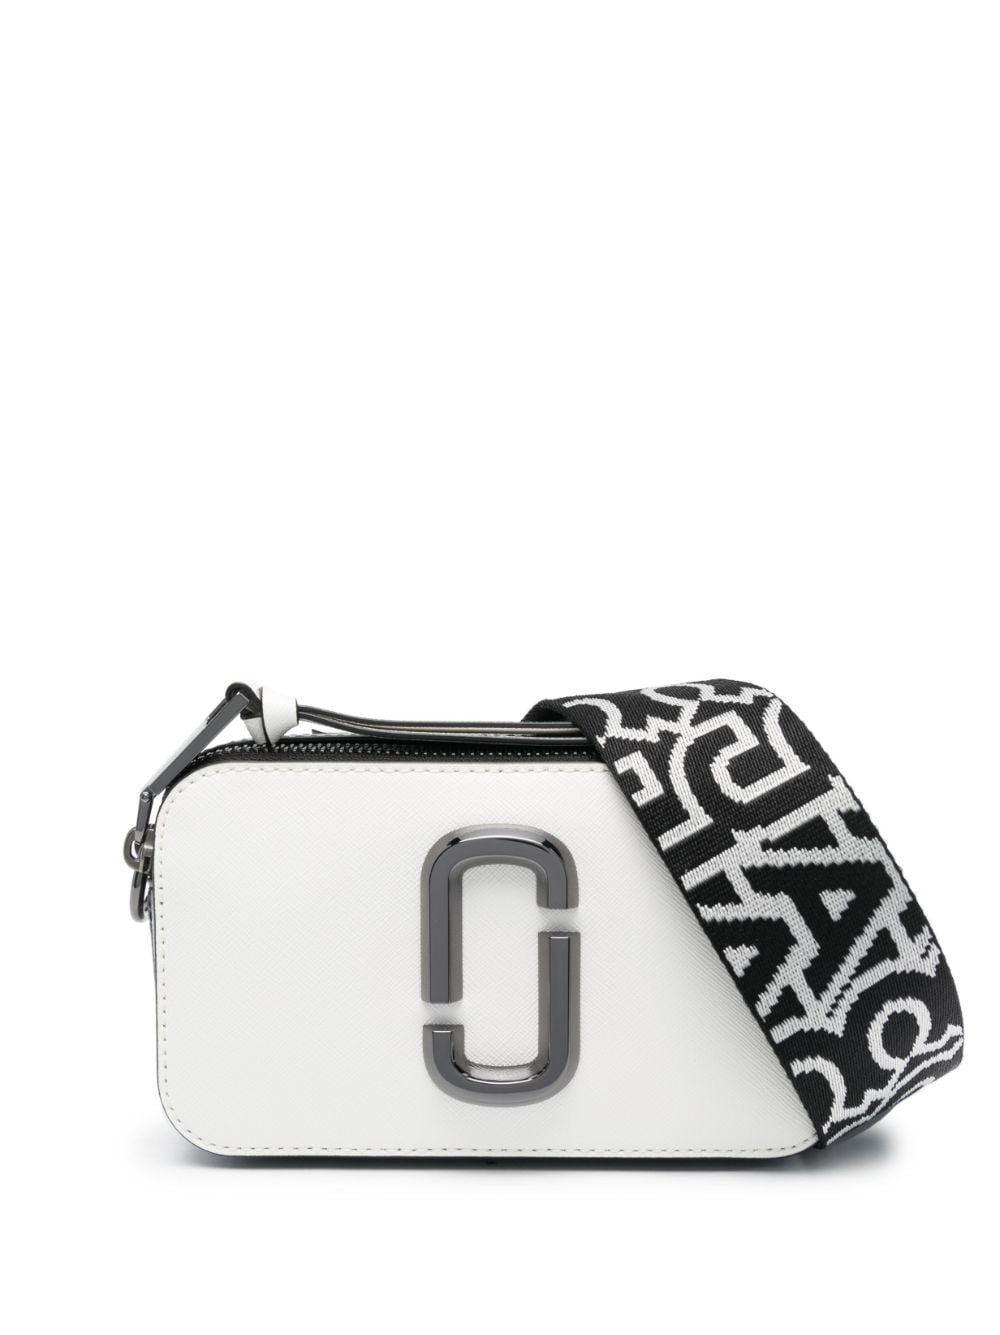 The Marc Jacobs Snapshot Coated Leather Camera Bag In New Black